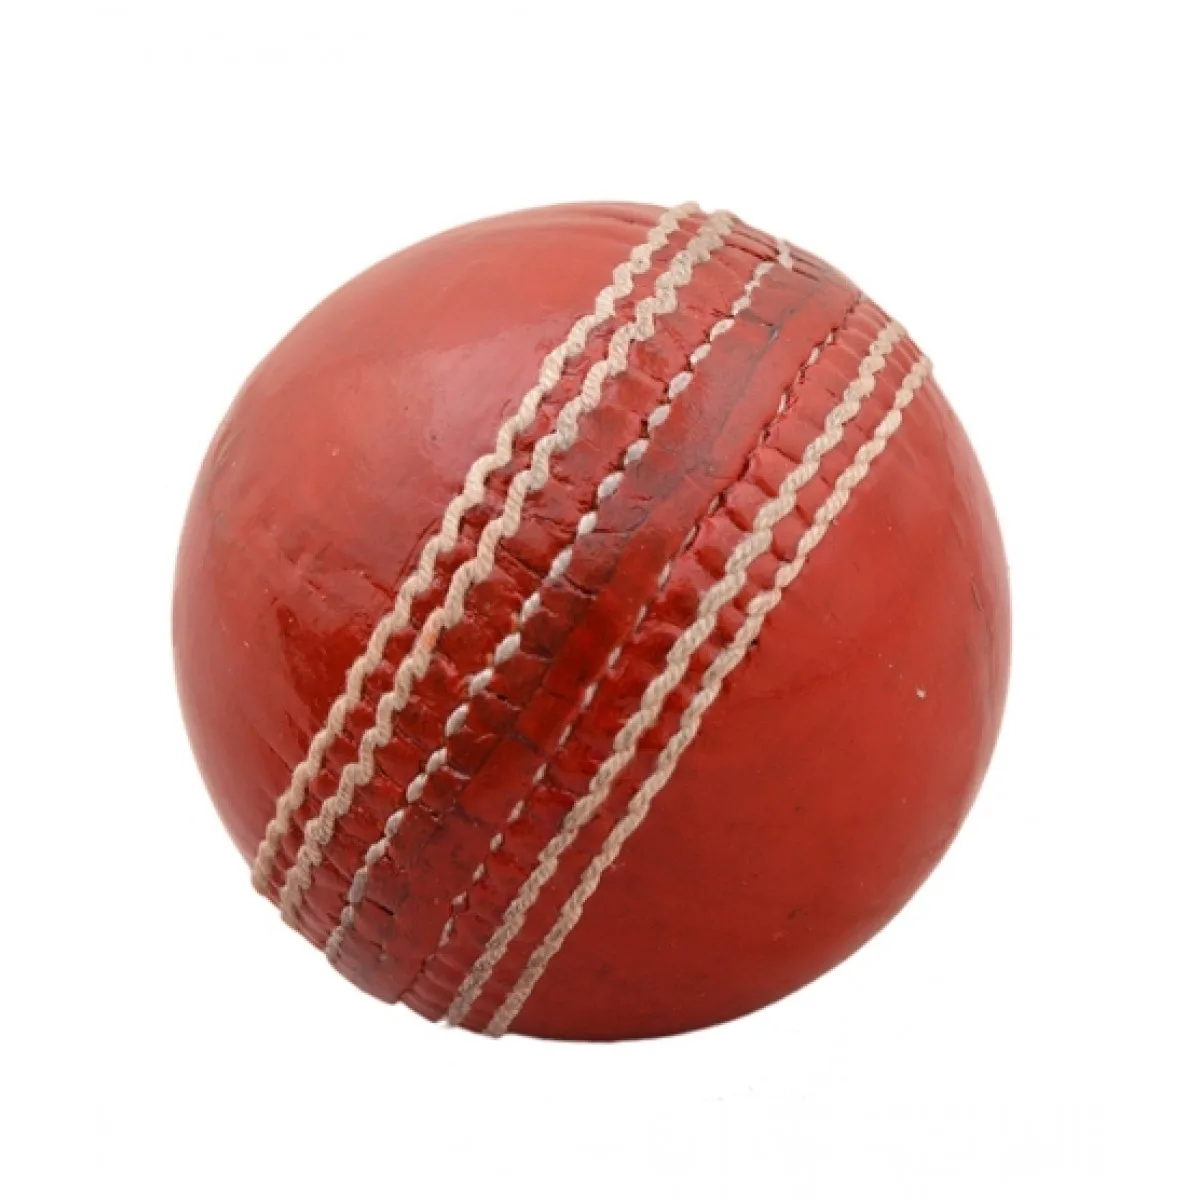 Professional Cricketers Choice Soft Leather Cricket Ball In Multi Color Hard Balls For Sale